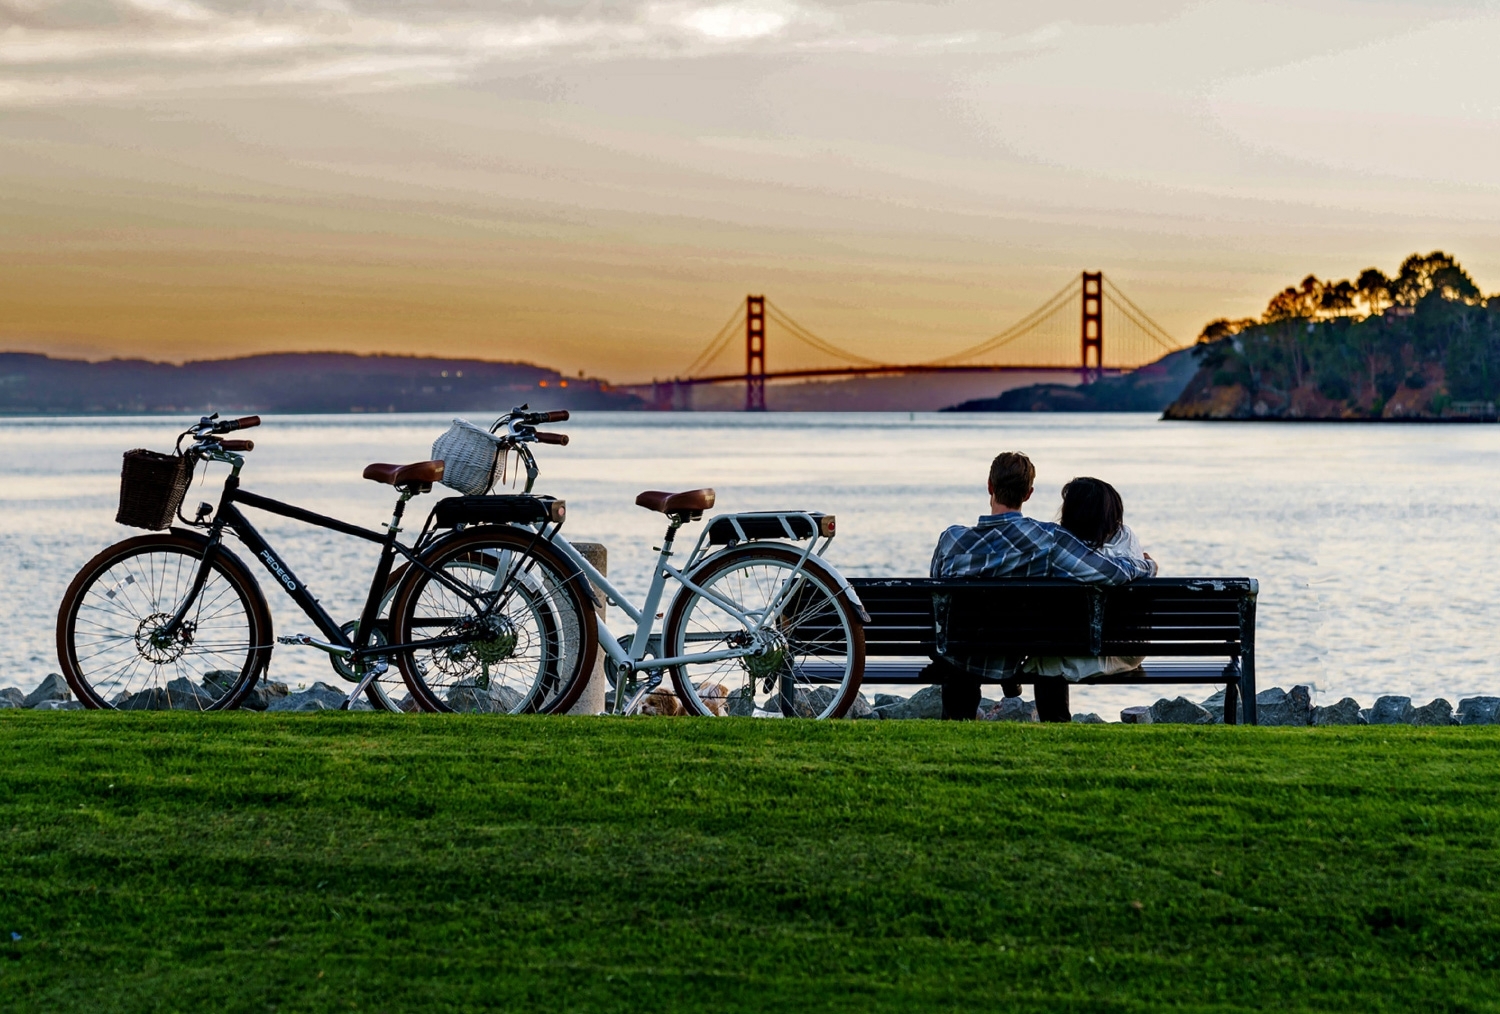 Couple sitting on a bench with bicycles behind them at Shoreline Park watching the sunset over the Golden Gate Bridge9-5956.jpg